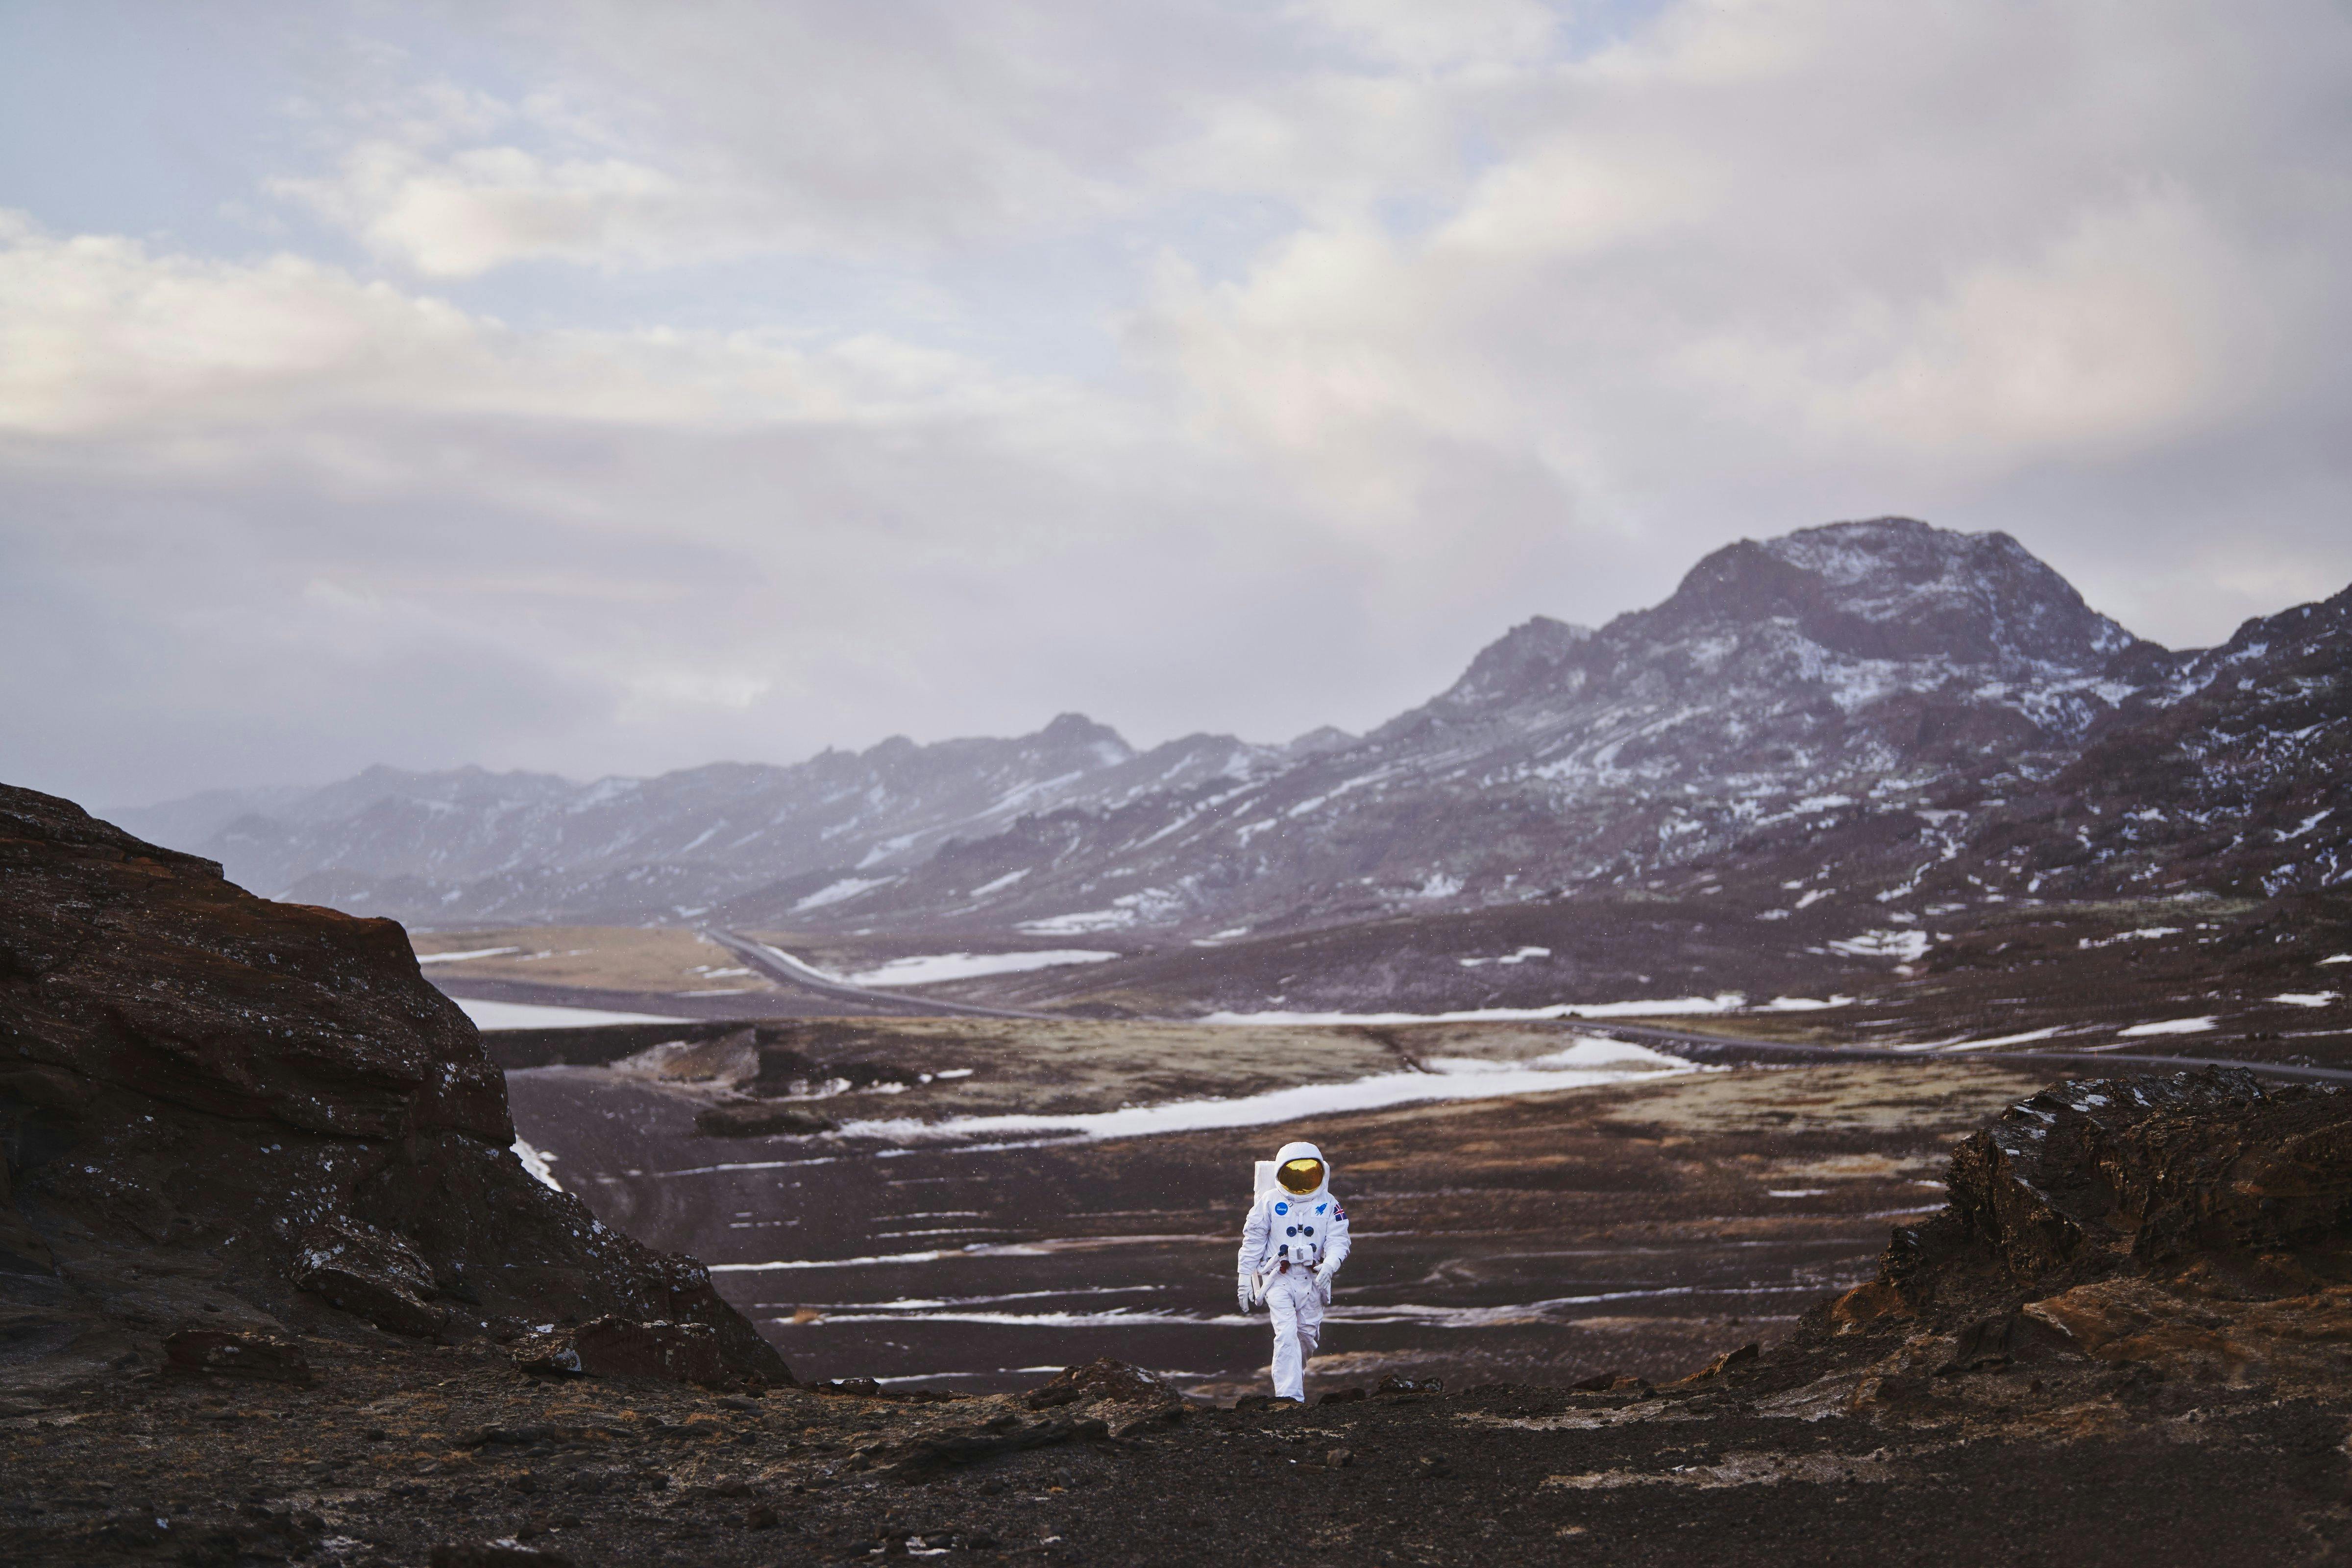 Mission Iceland: Out-of-this-world experinces right here in Iceland